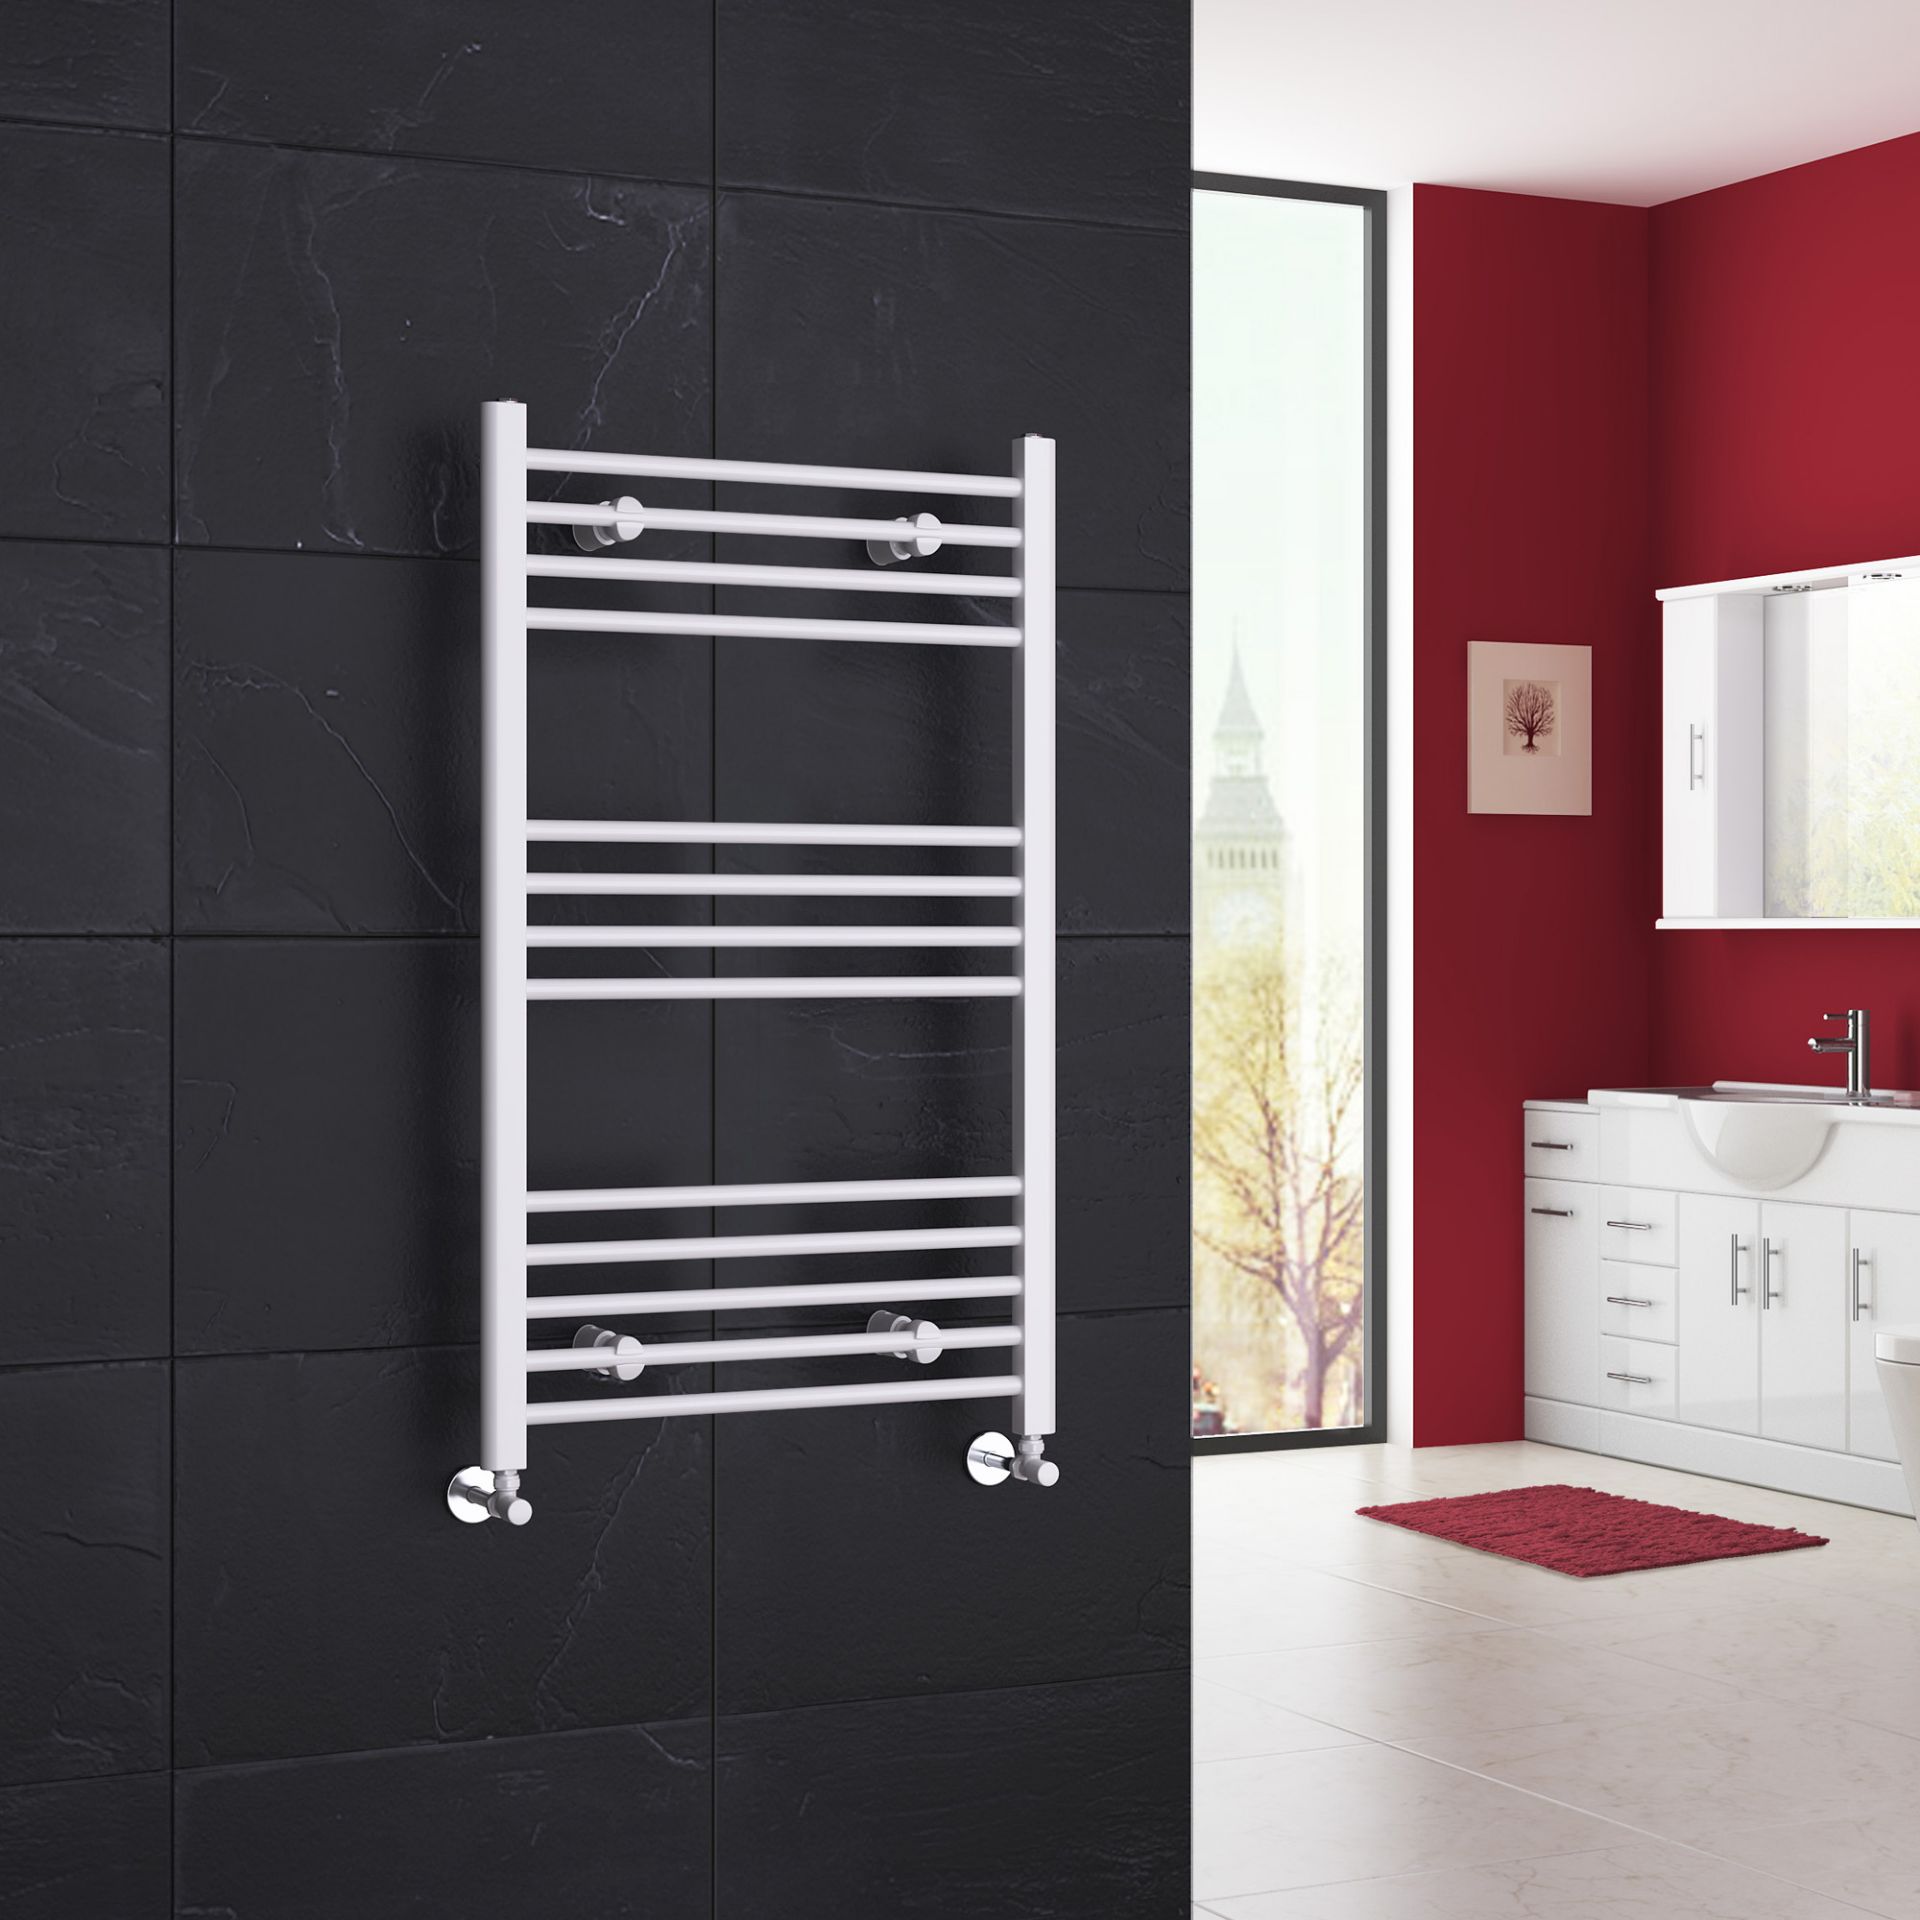 AA127- 1000x600mm White Straight Rail Ladder Towel Radiator - Polar Basic Offering durability and - Image 5 of 7